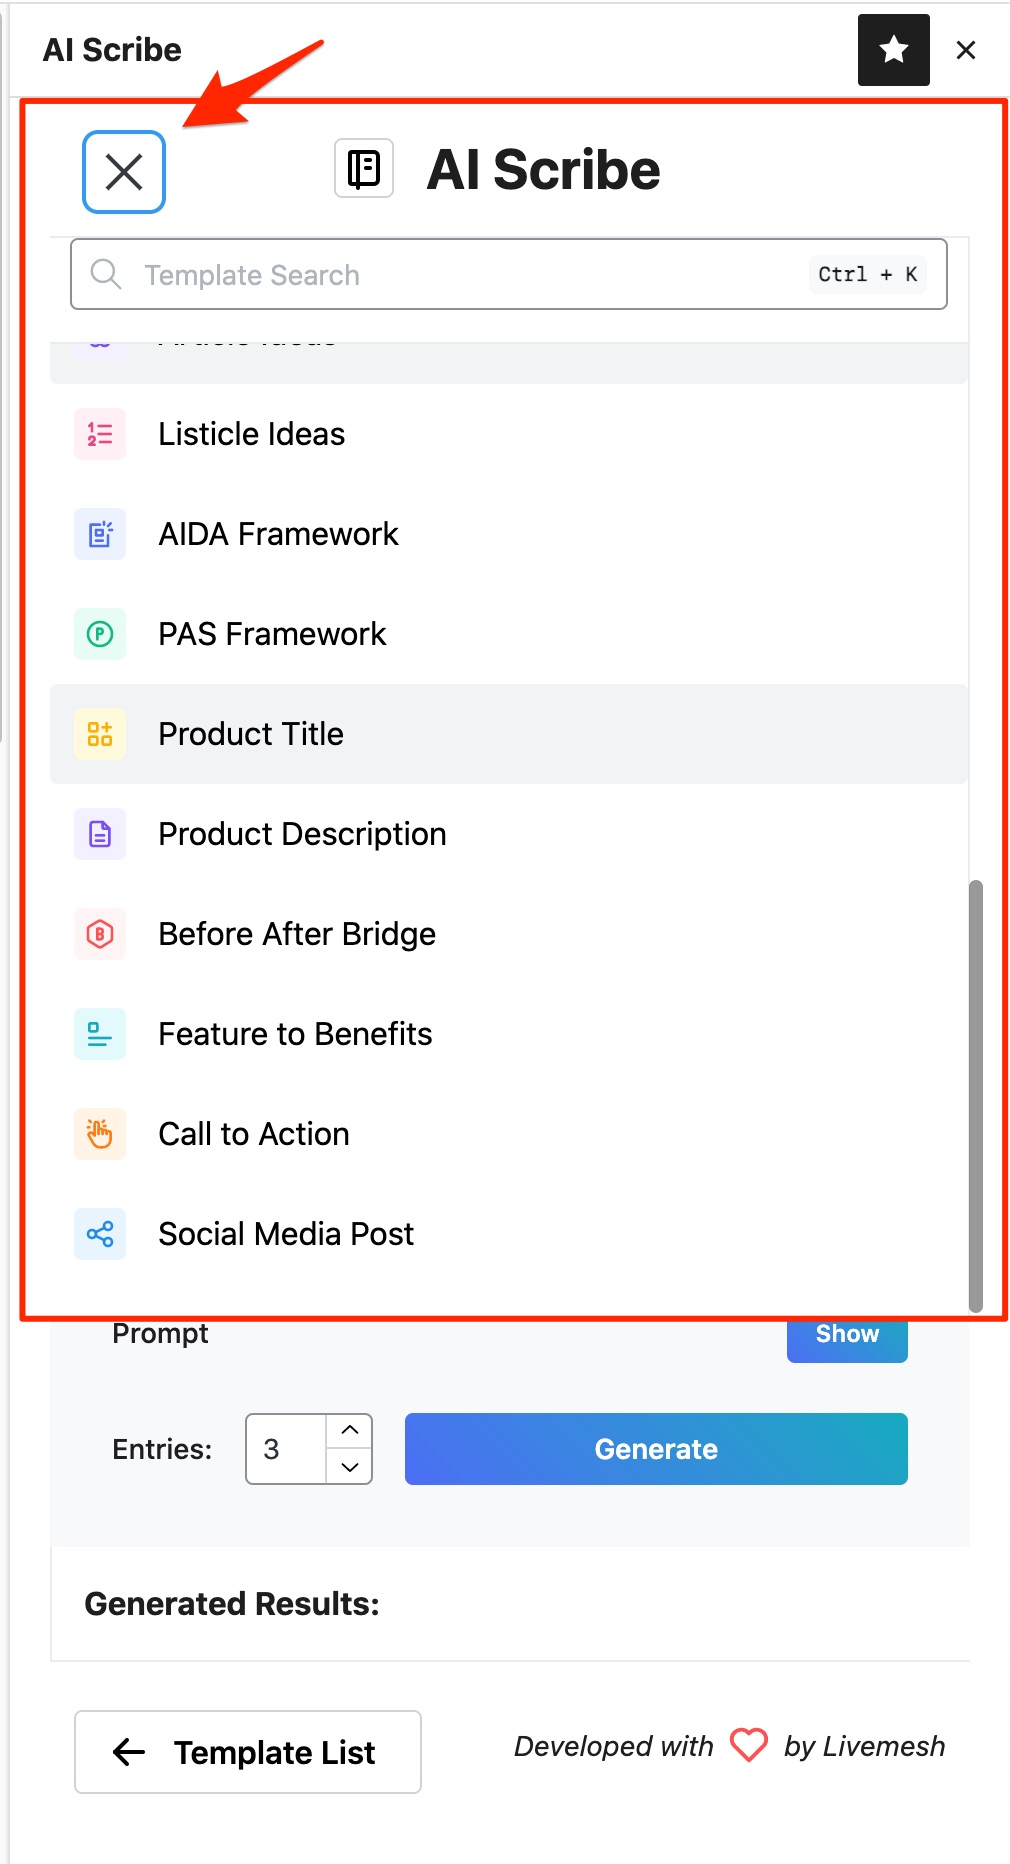 The template list navigation bar in the AI Scribe sidebar app